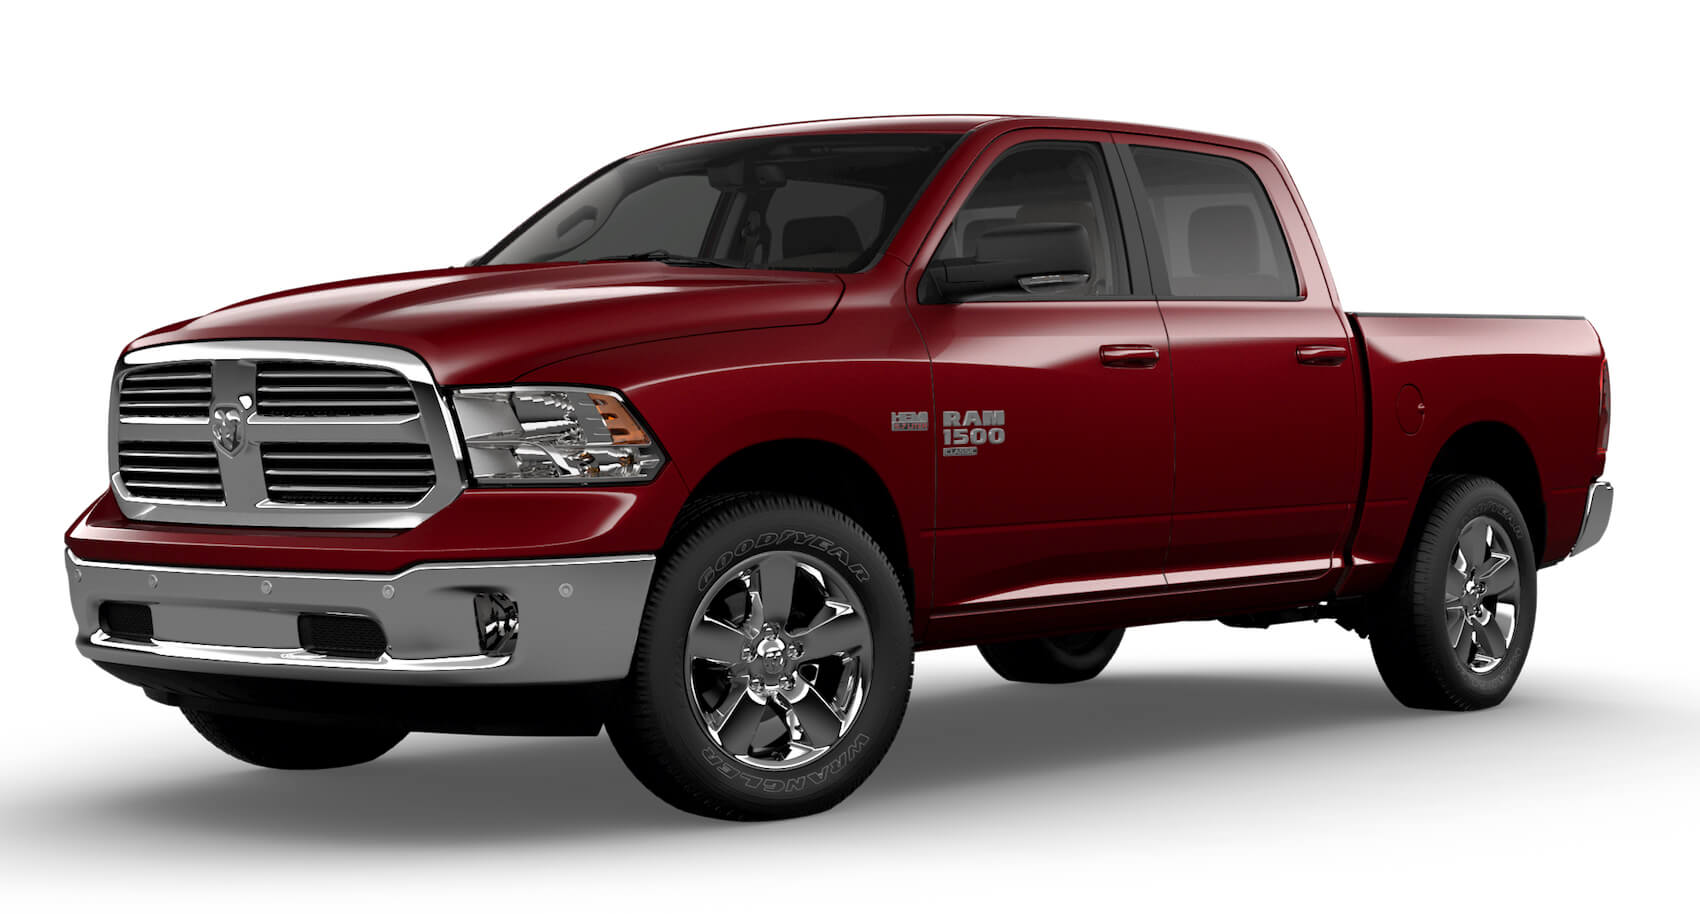 Used Ram 1500 for sale Pittston, PA